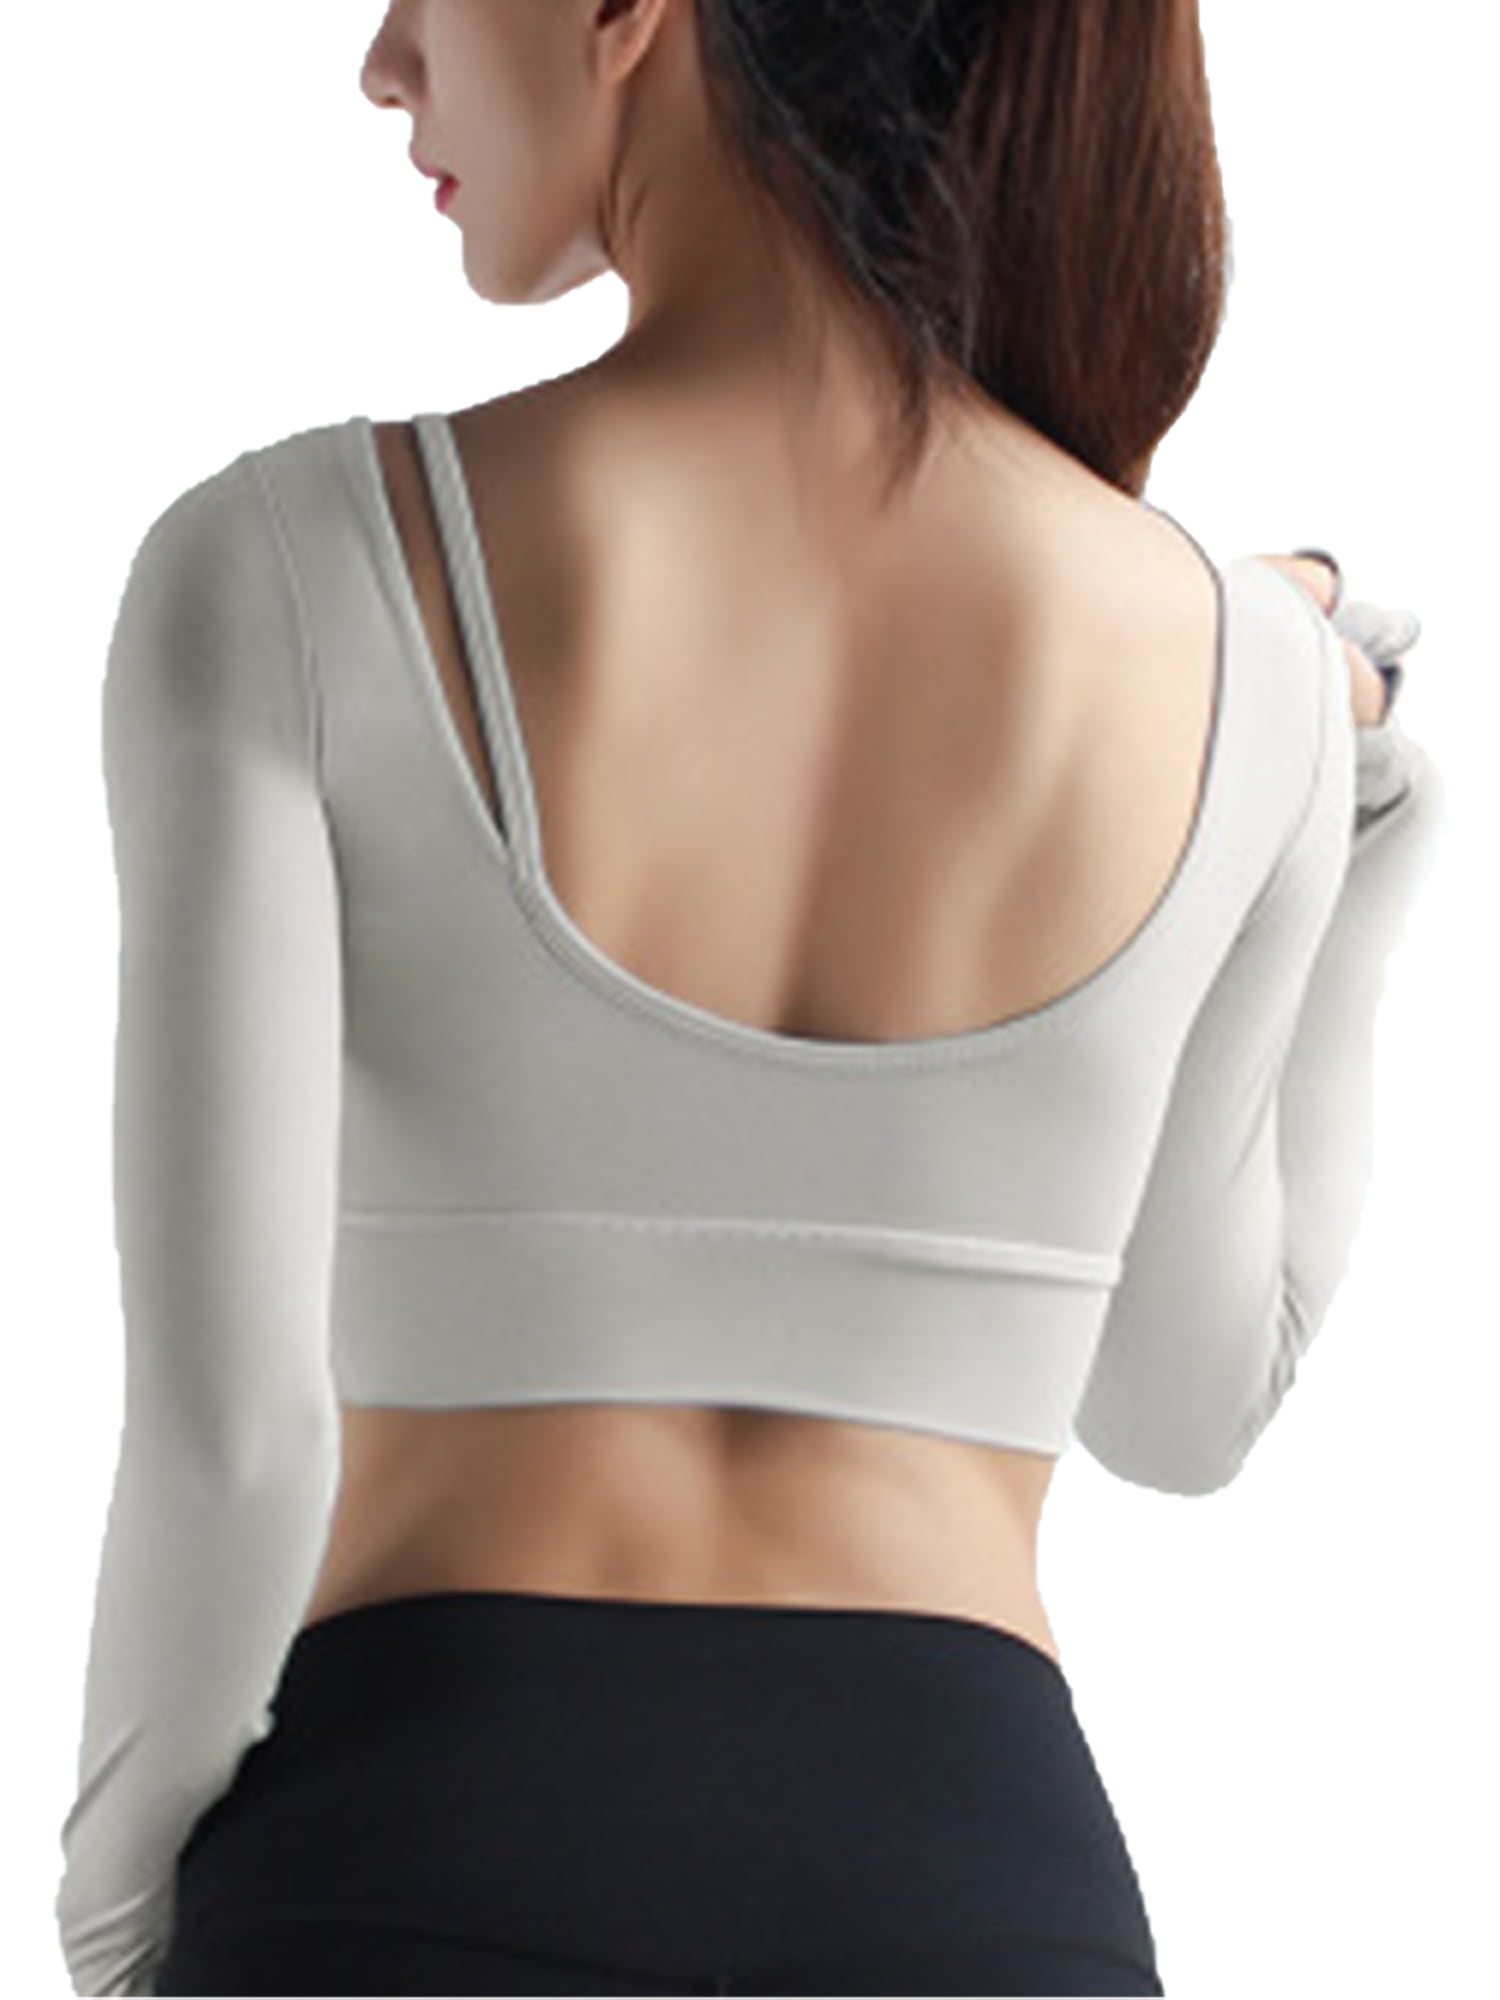 Women's Athletic Fitness Yoga Gym Workout Running Sports Long Sleeve Crop Top 